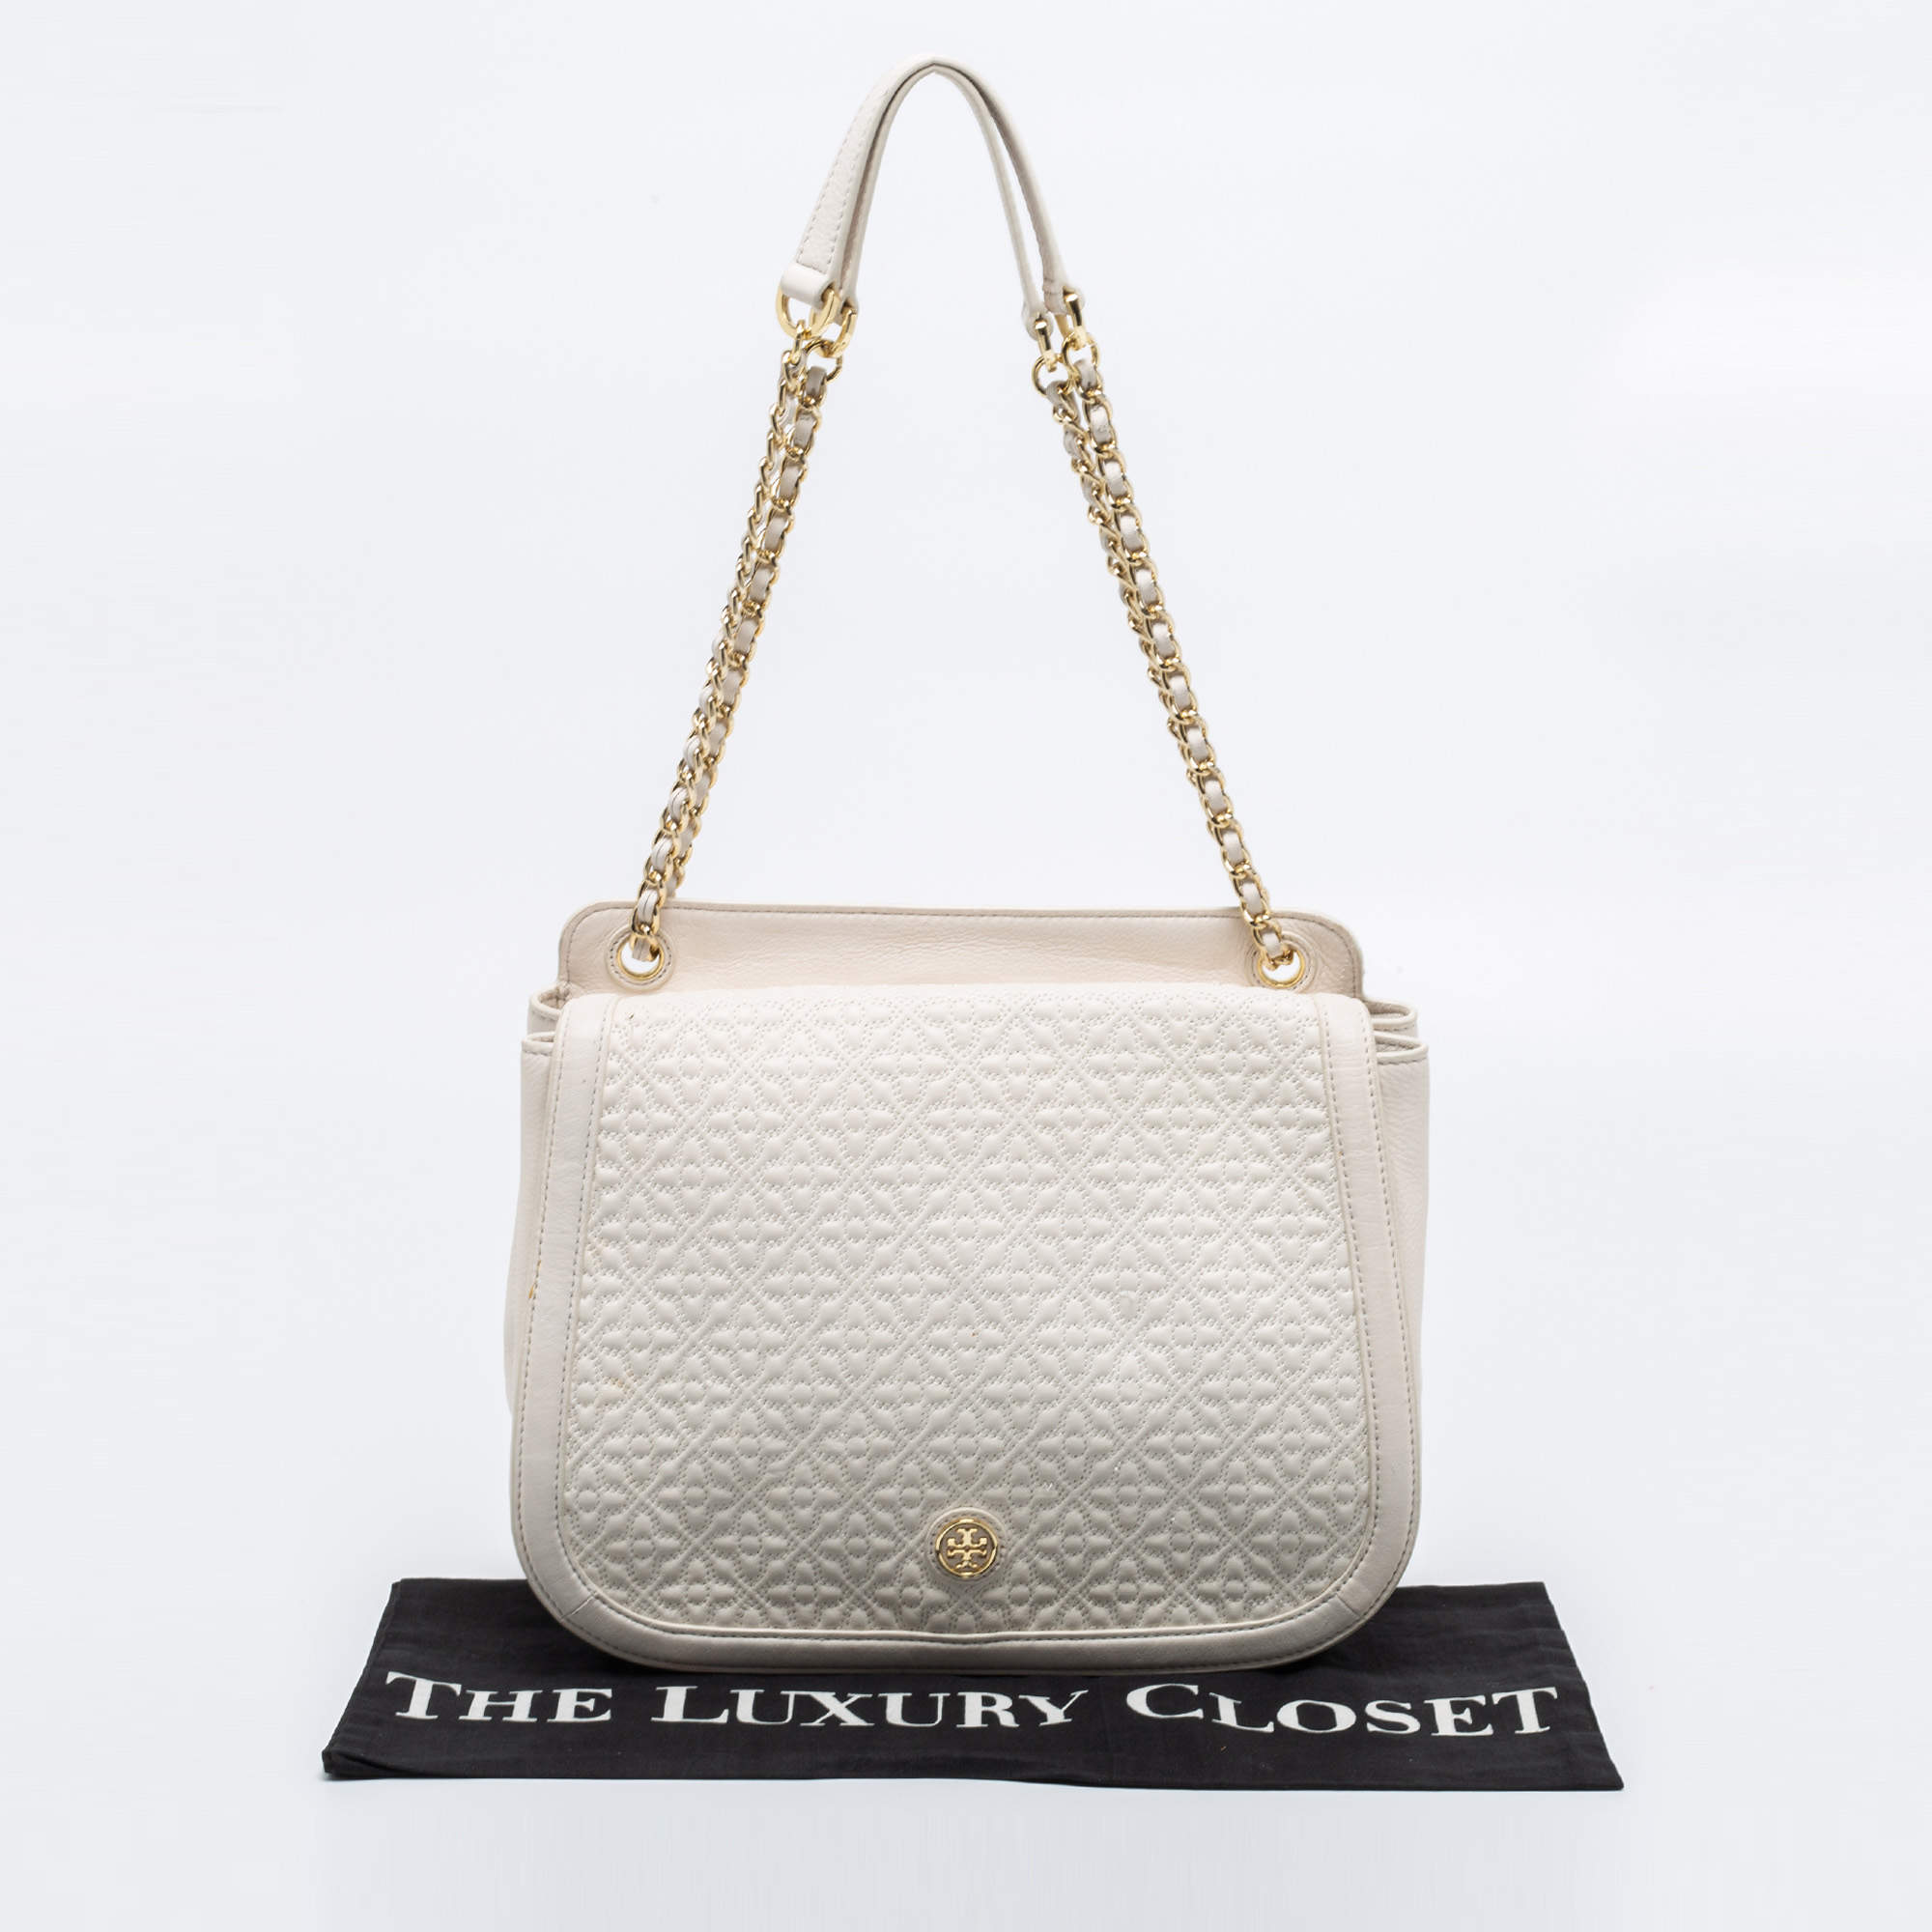 Tory Burch Cream Quilted Leather Bryant Shoulder Bag Tory Burch | TLC